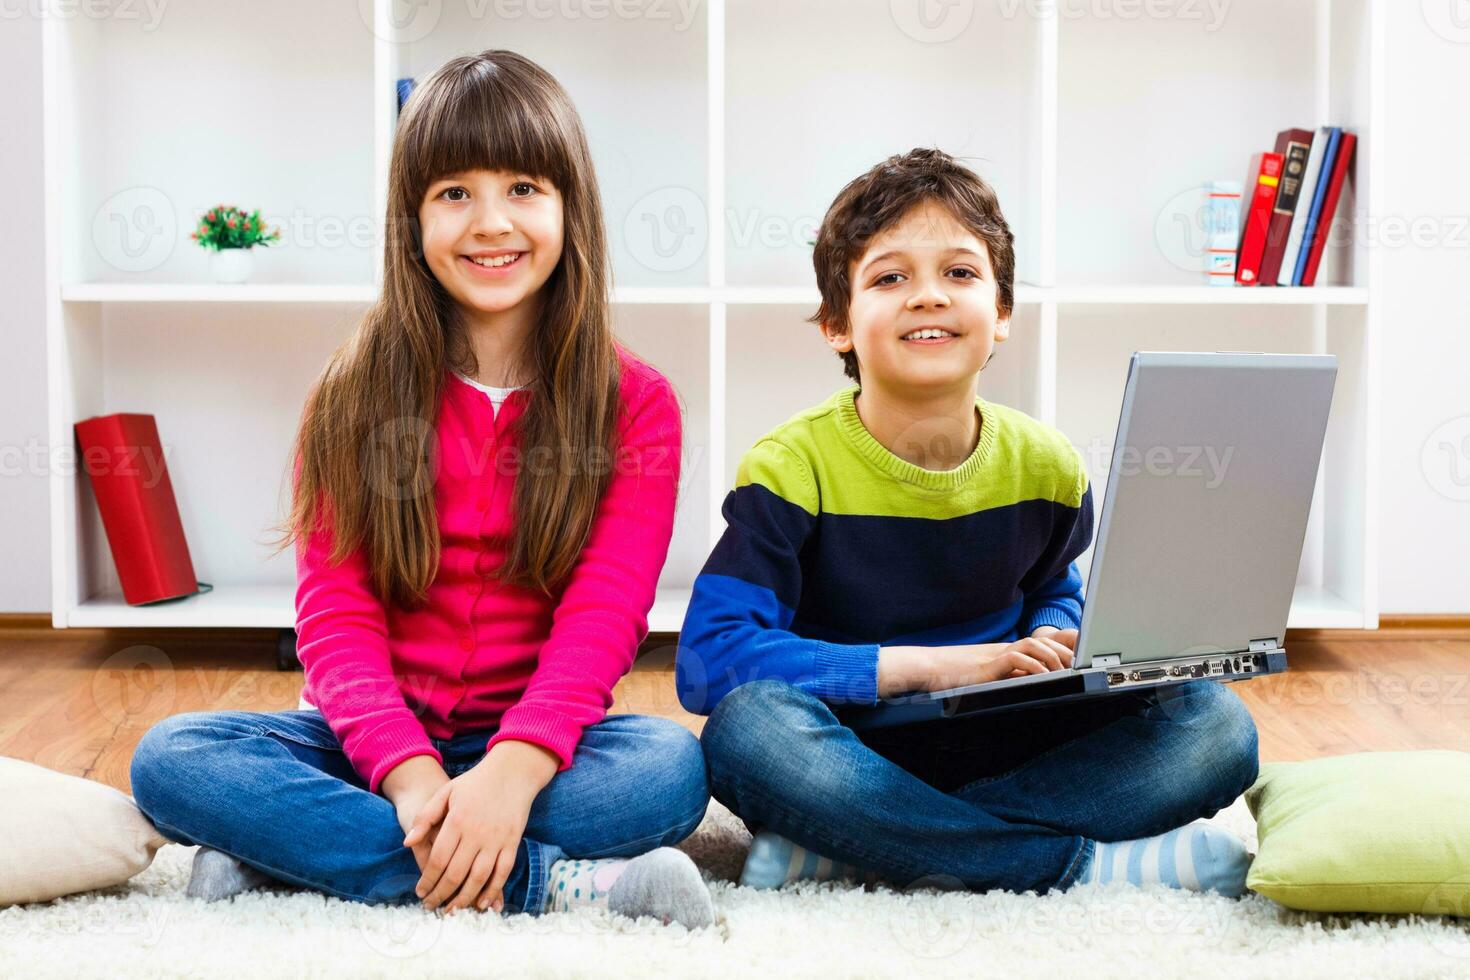 Two children sitting on the floor with a laptop photo